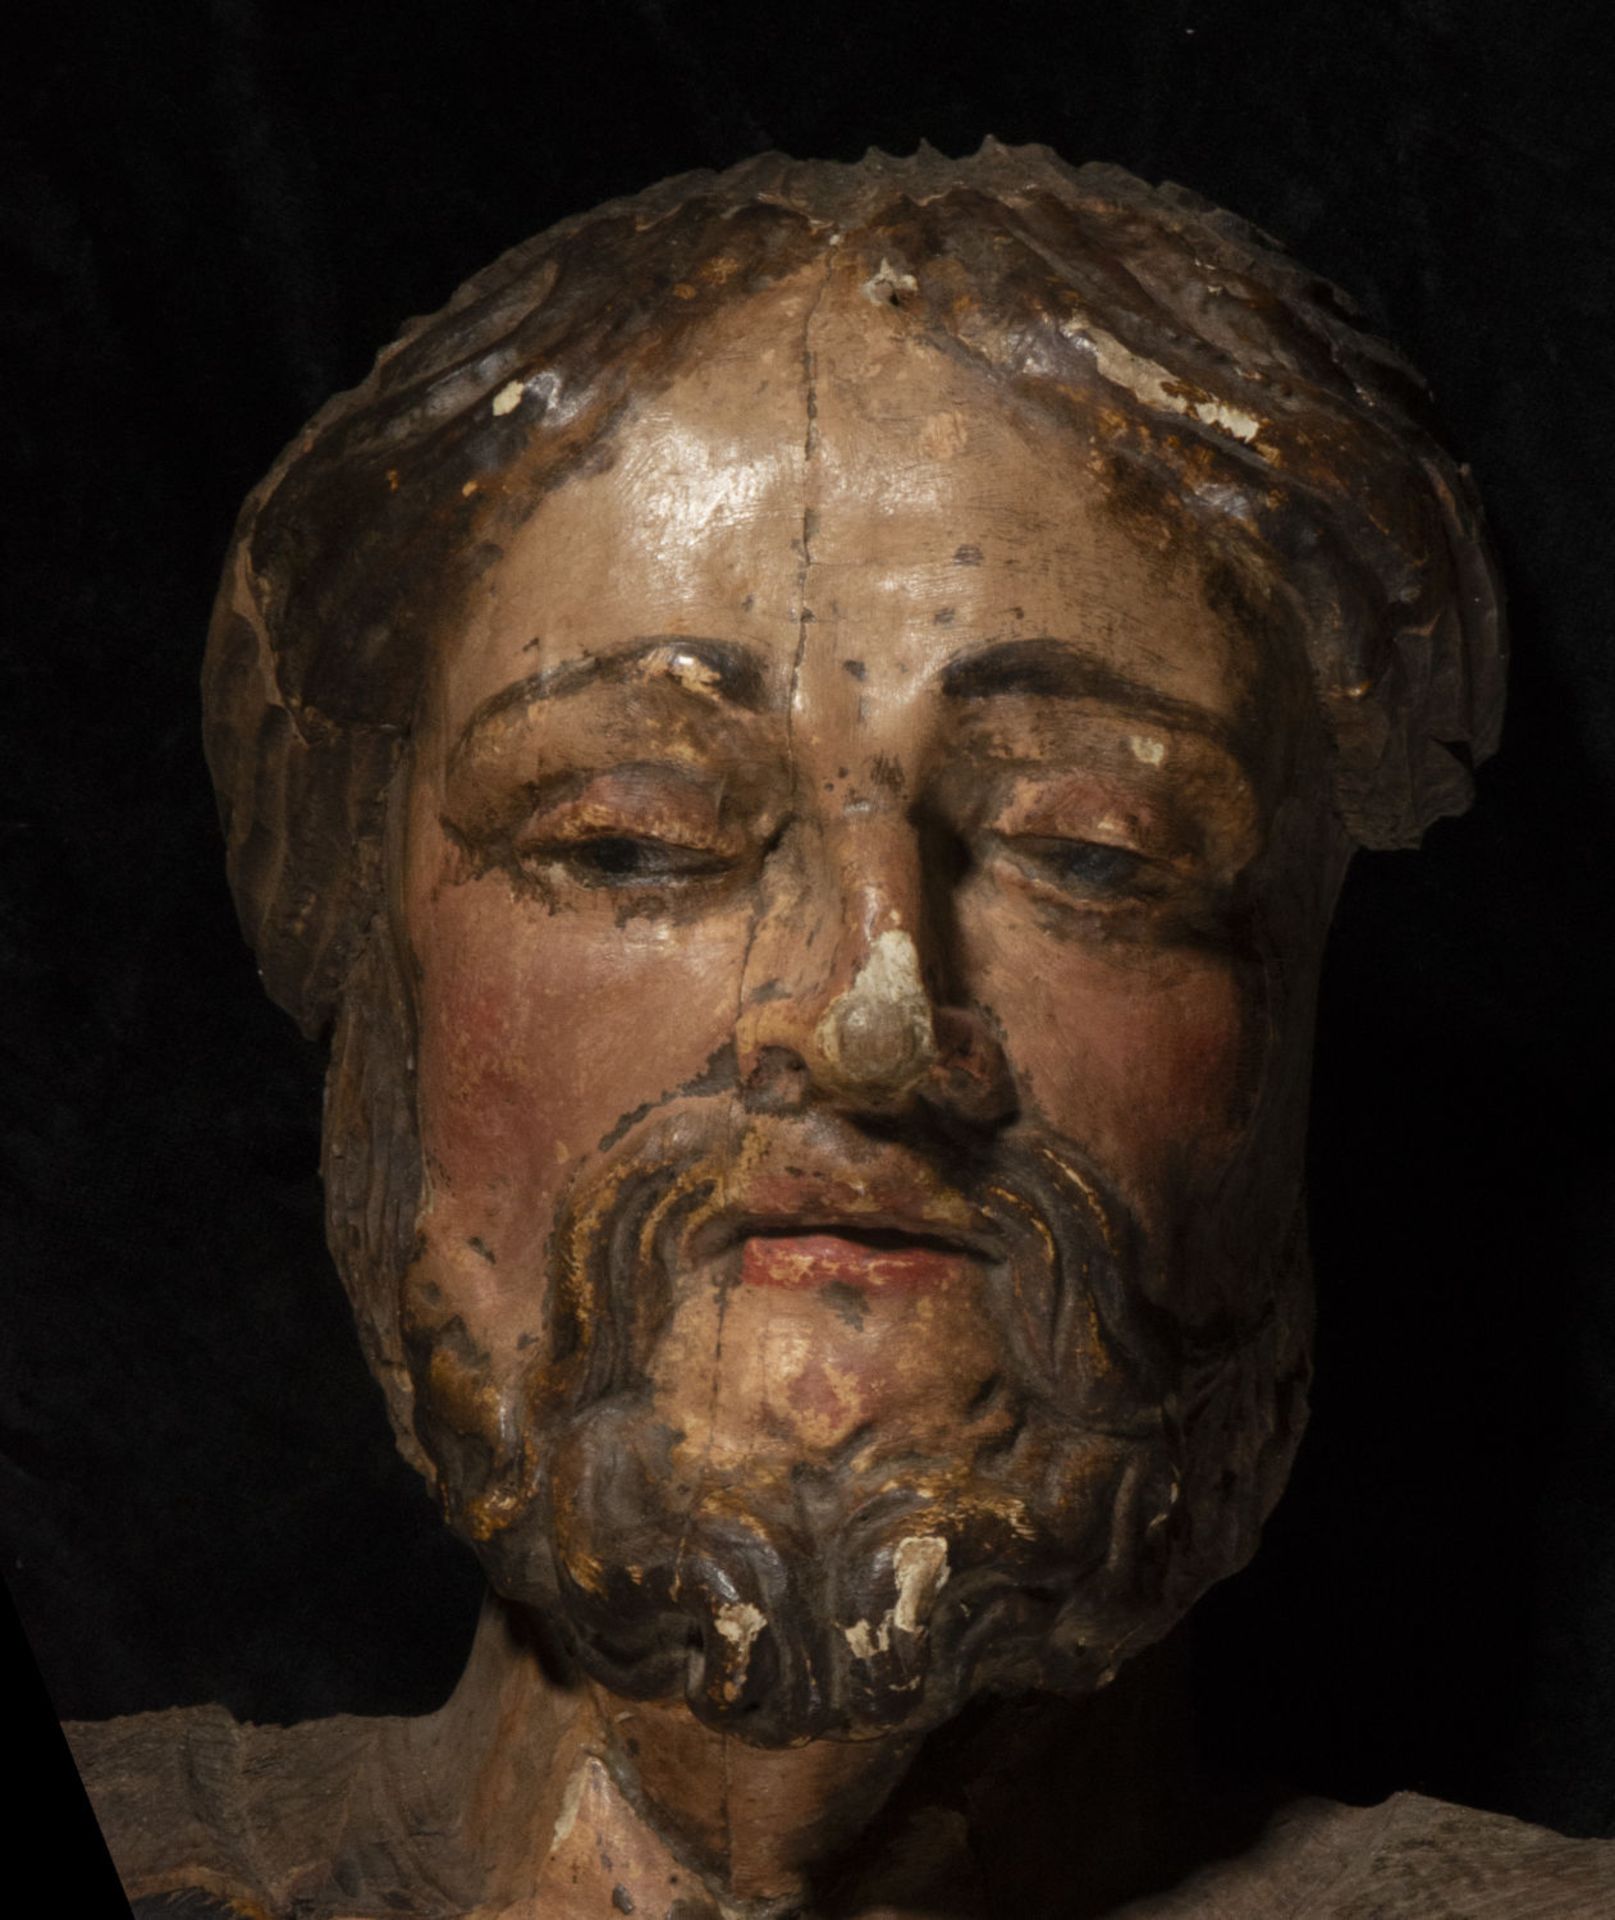 Relief of Saint James the Great in wood carving, 16th century Castilian school - Image 3 of 8